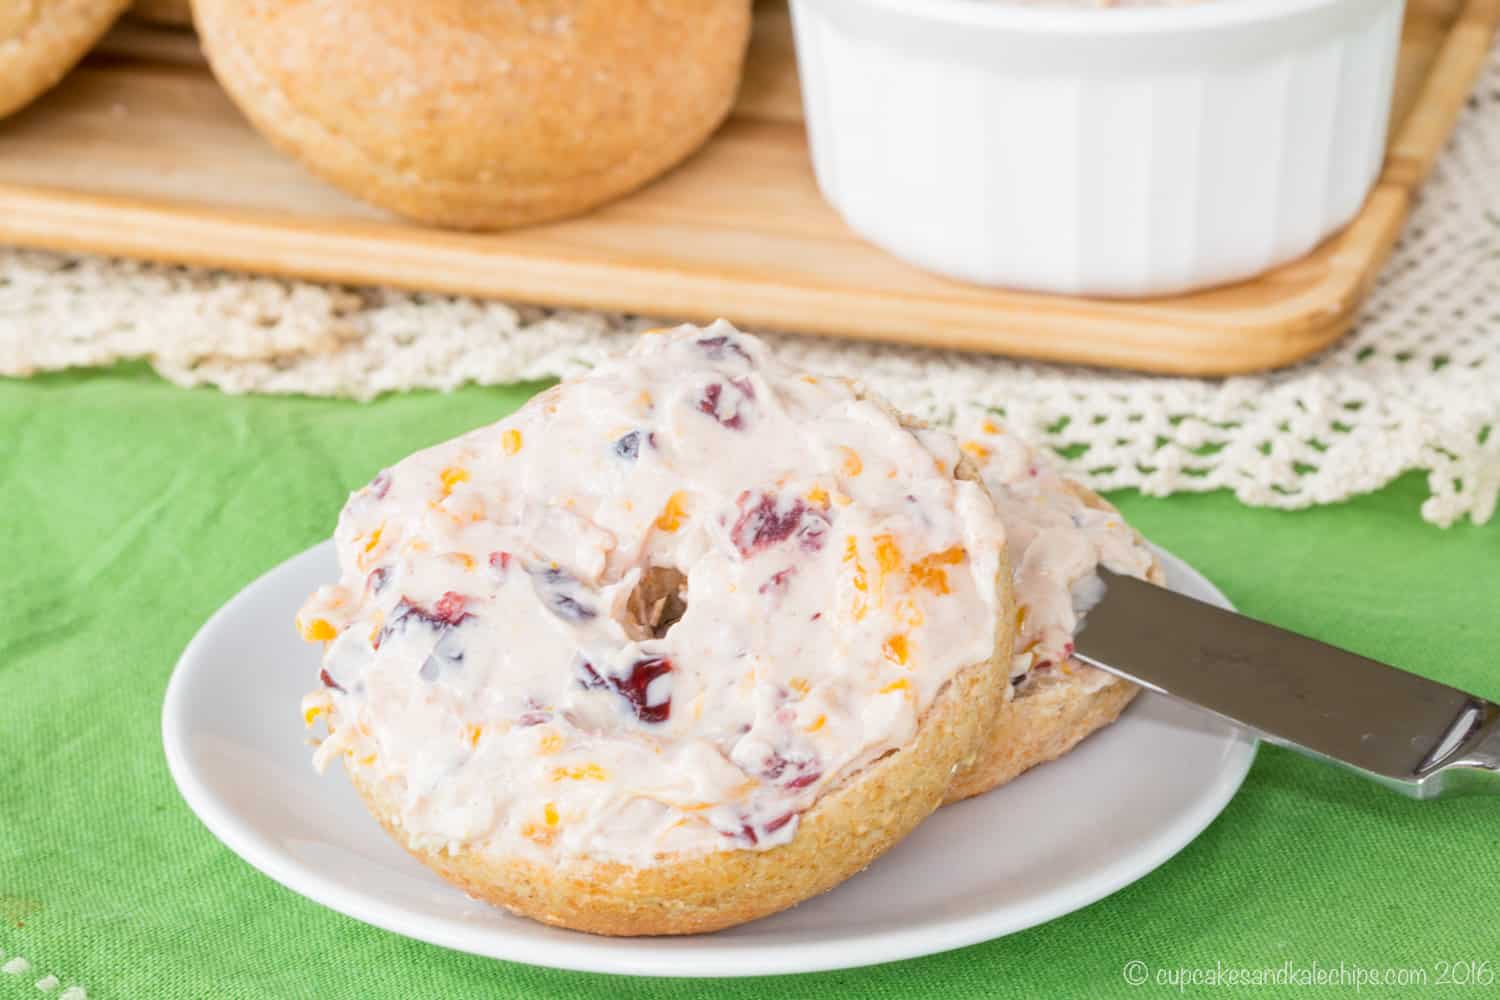 A mini whole wheat bagel covered with orange cranberry cream cheese on a white plate on a green tablecloth.